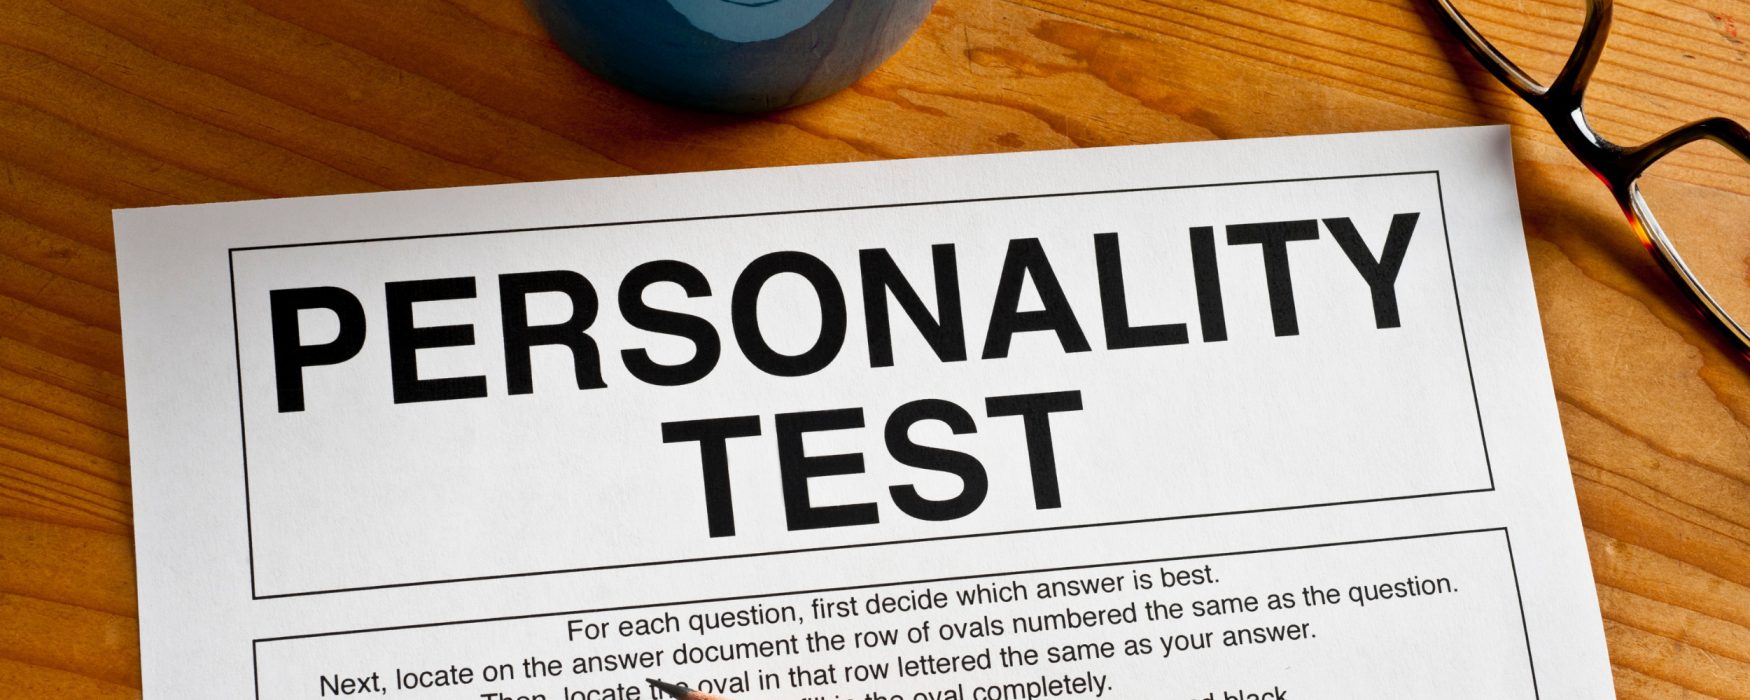 Image of a sheet of paper with the words personality test printed on it